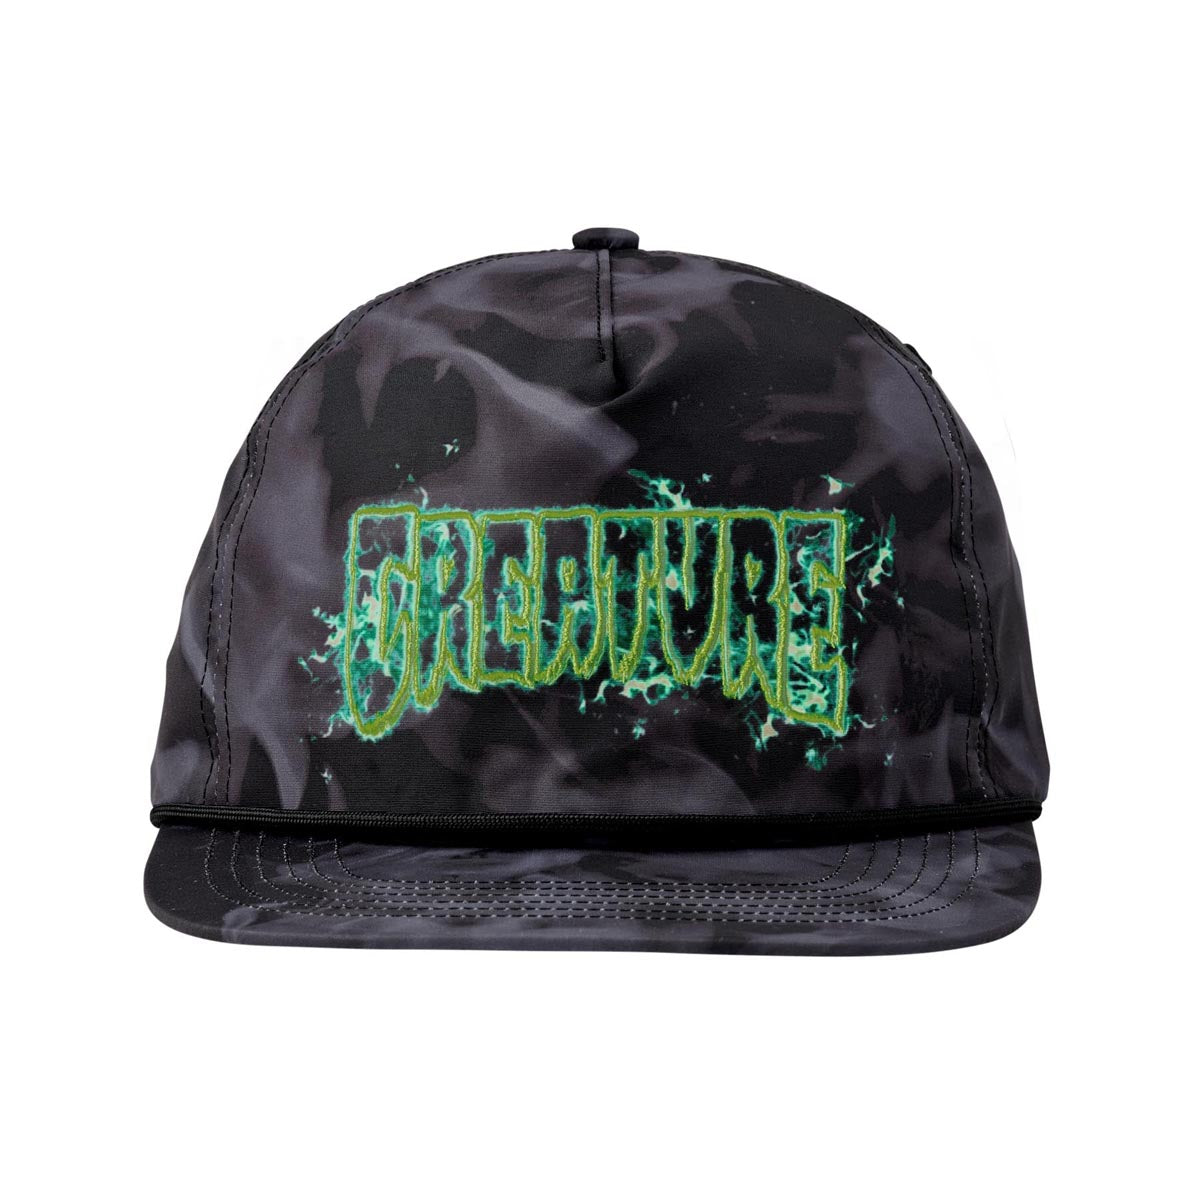 Creature Inferno Snapback Unstructured Hat - Black image 3